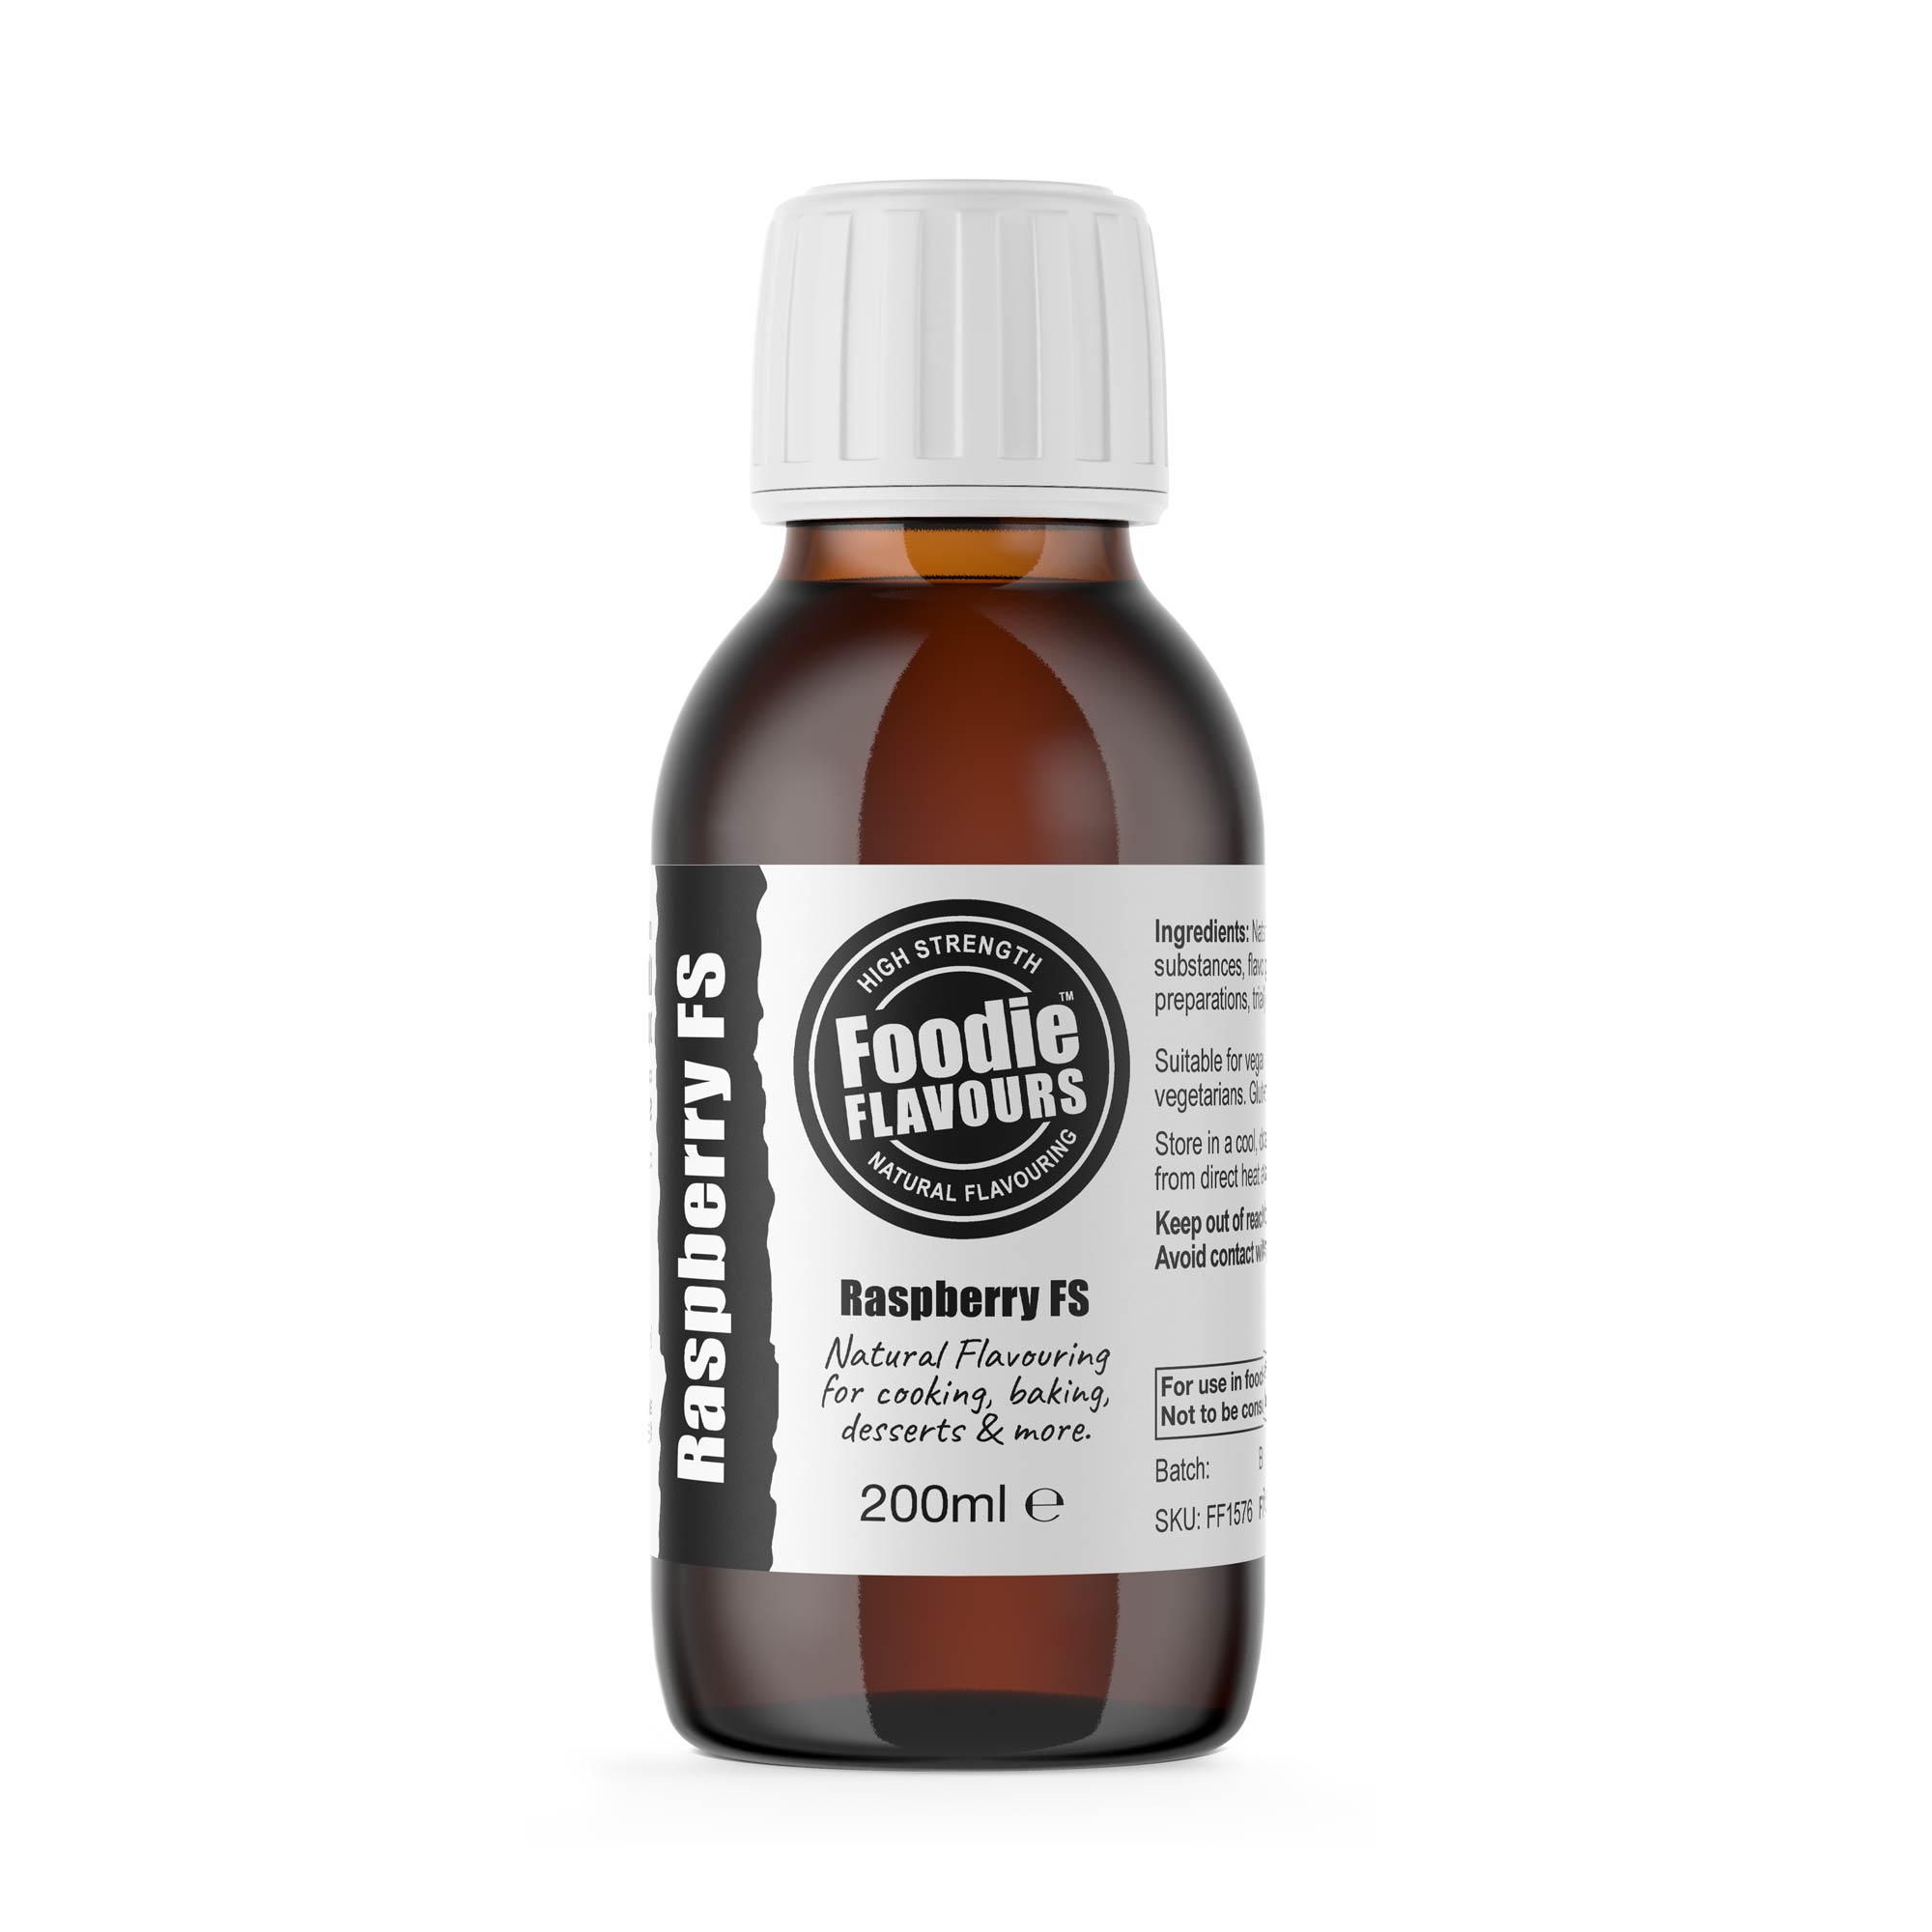 Raspberry FS Natural Flavouring 200ml - Foodie Flavours